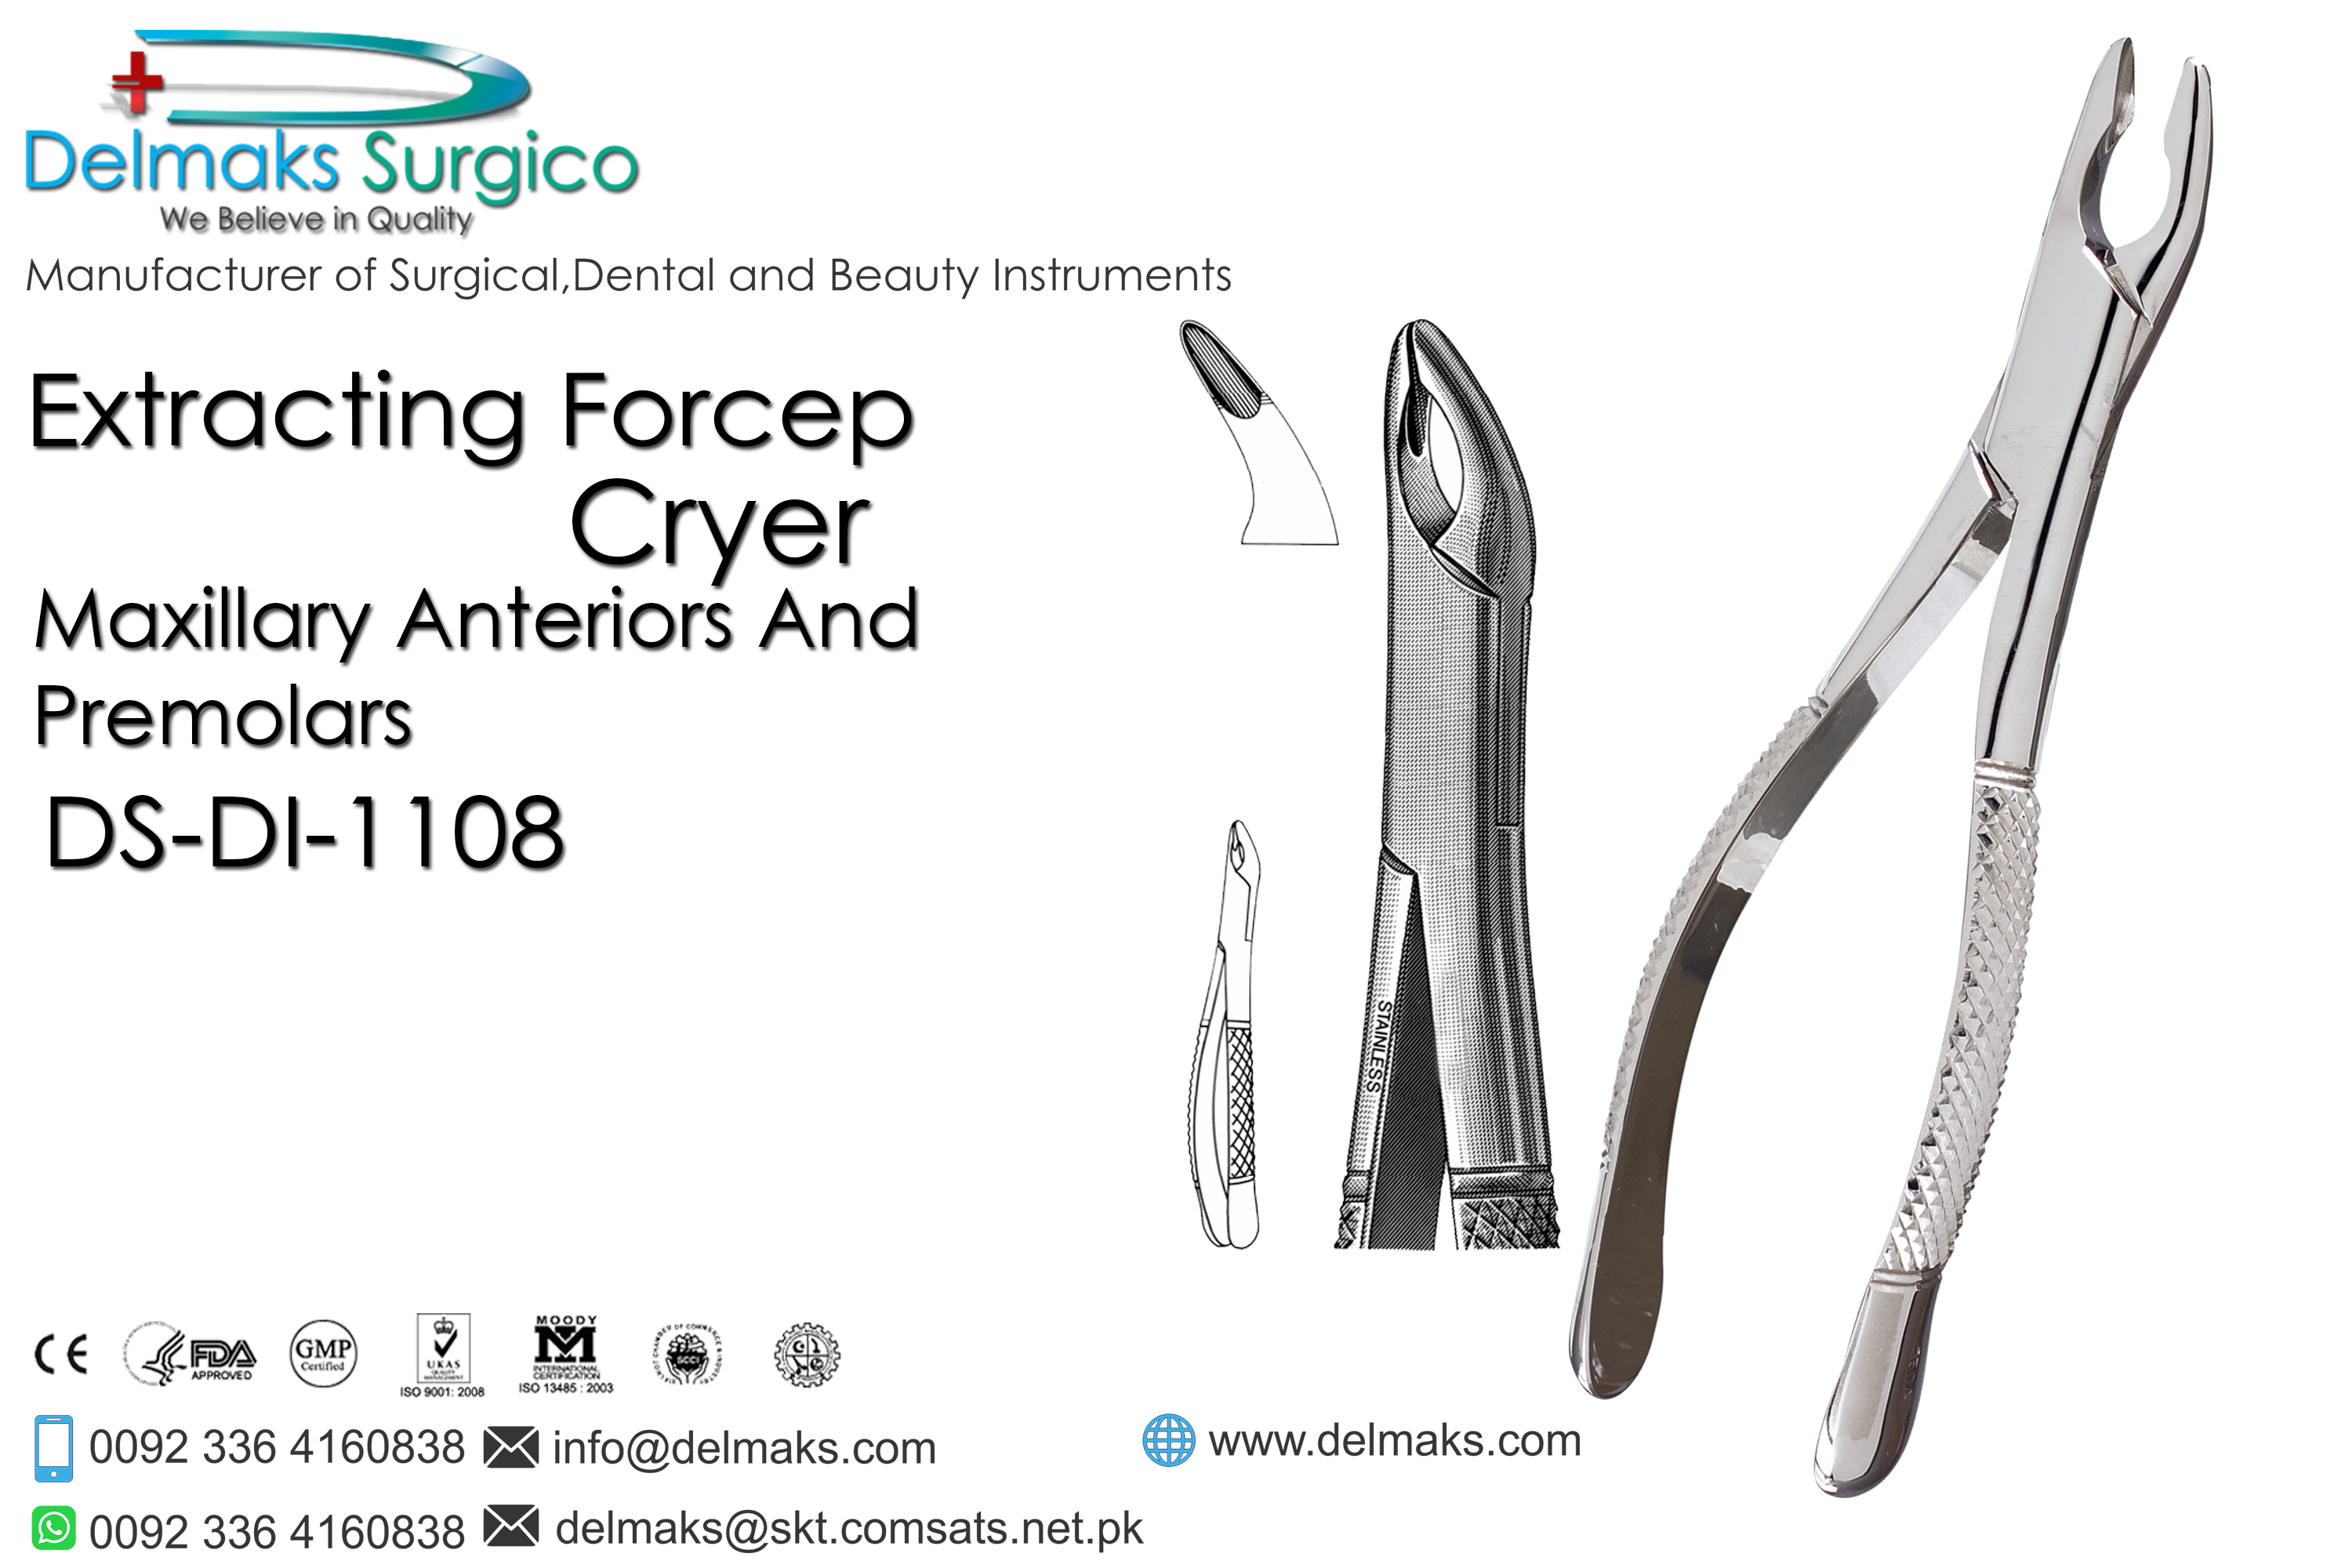 Extracting Forceps Cryer(Maxillary Anteriors And Premolars)-Oral and Maxillofacial Surgery Instruments-Dental Instruments-Delmaks Surgico 